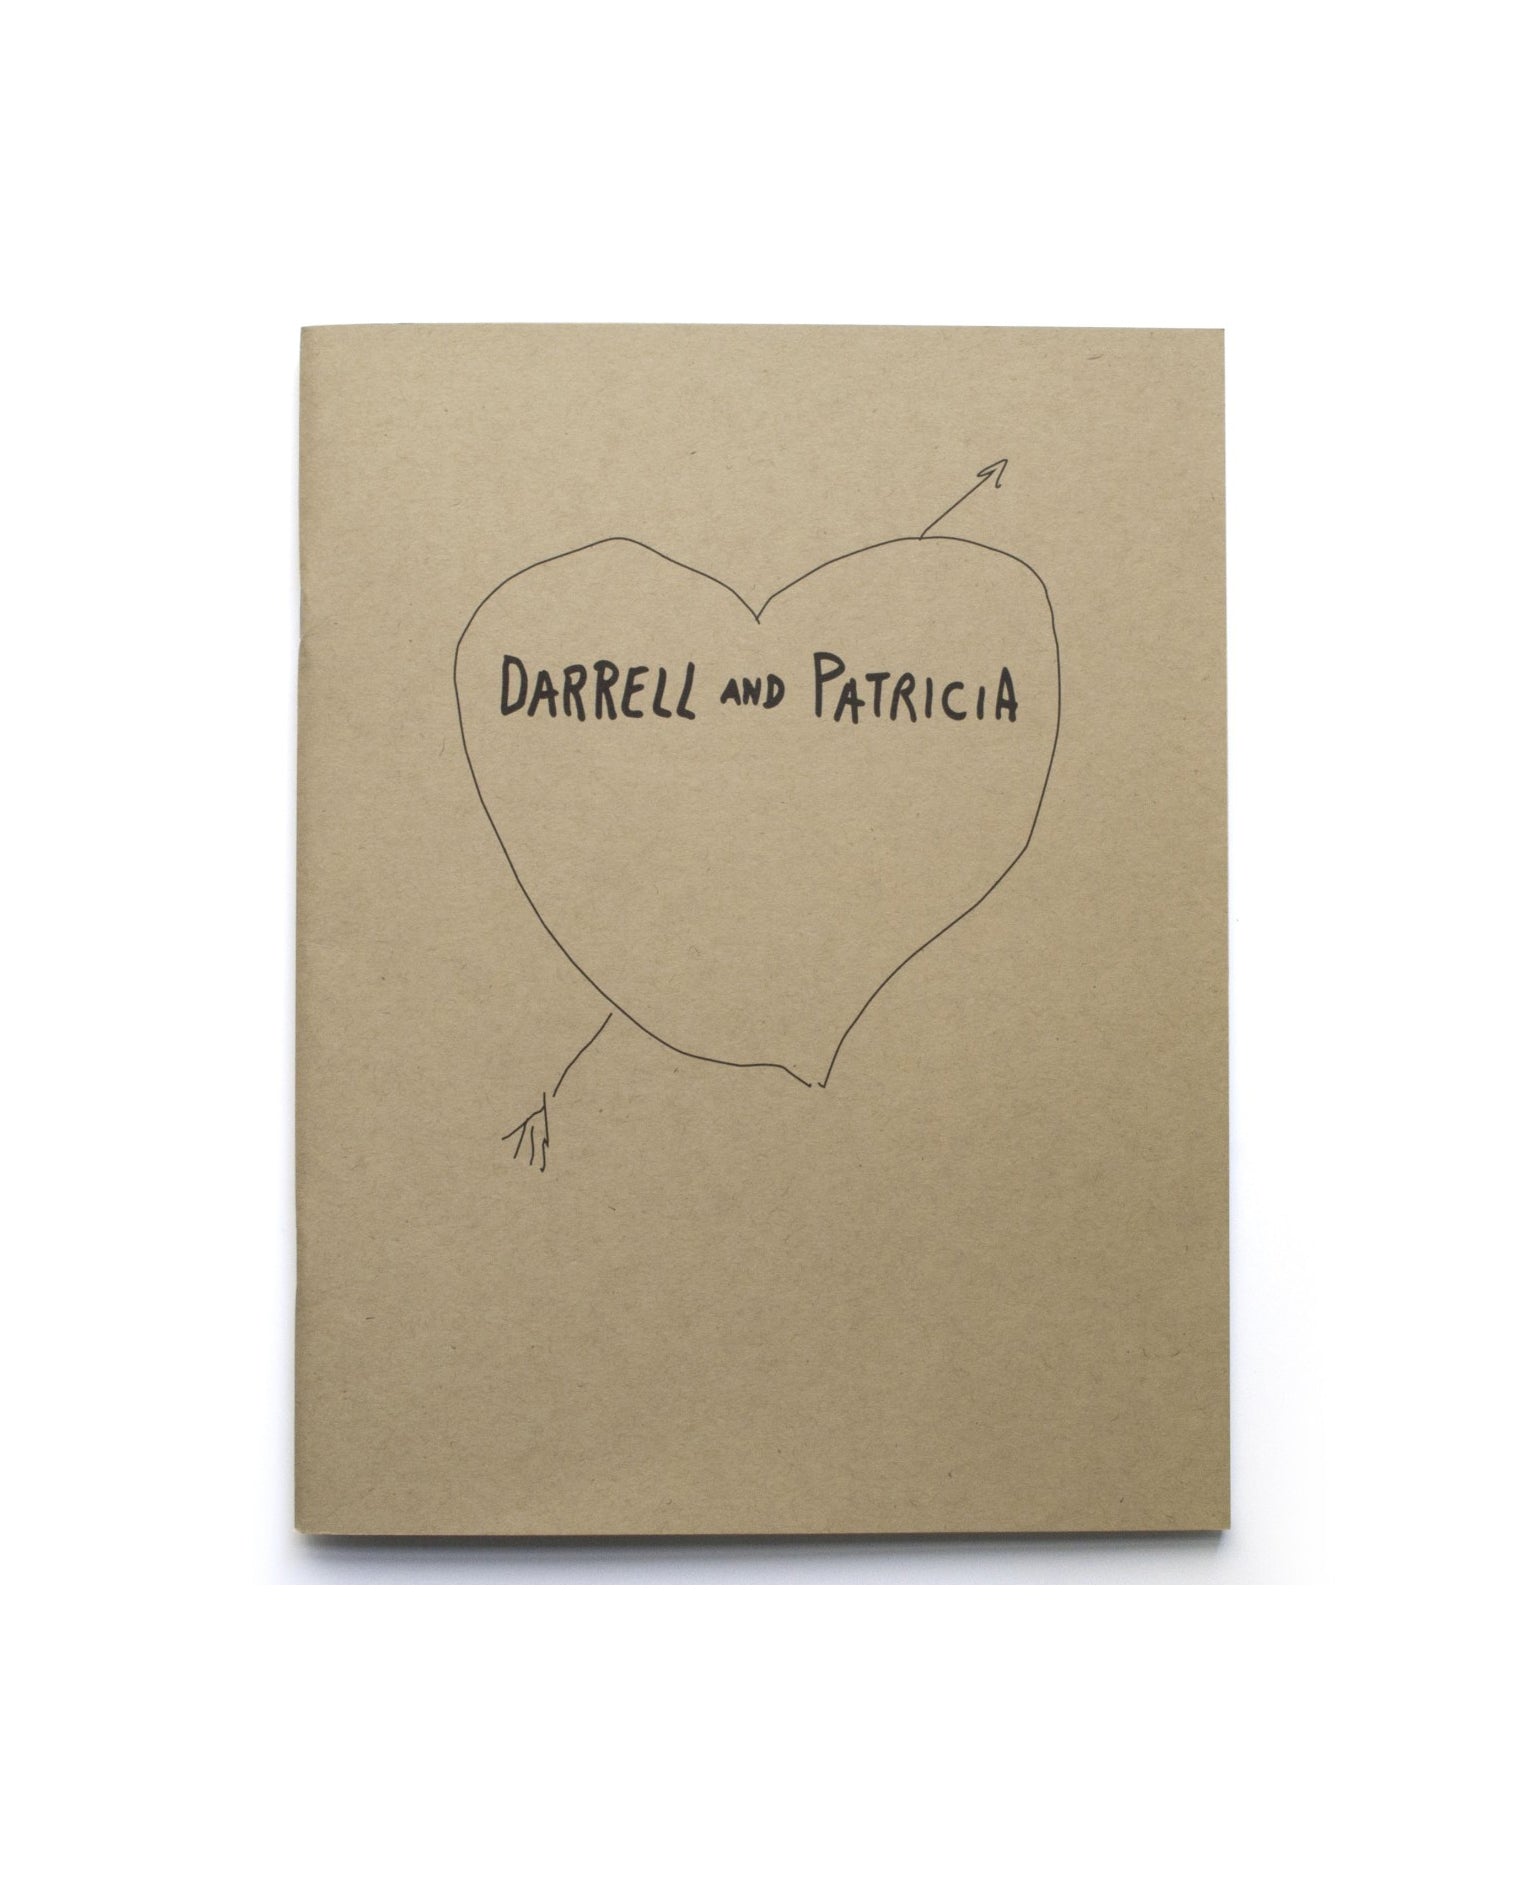 Darrell and Patricia: A Love Story